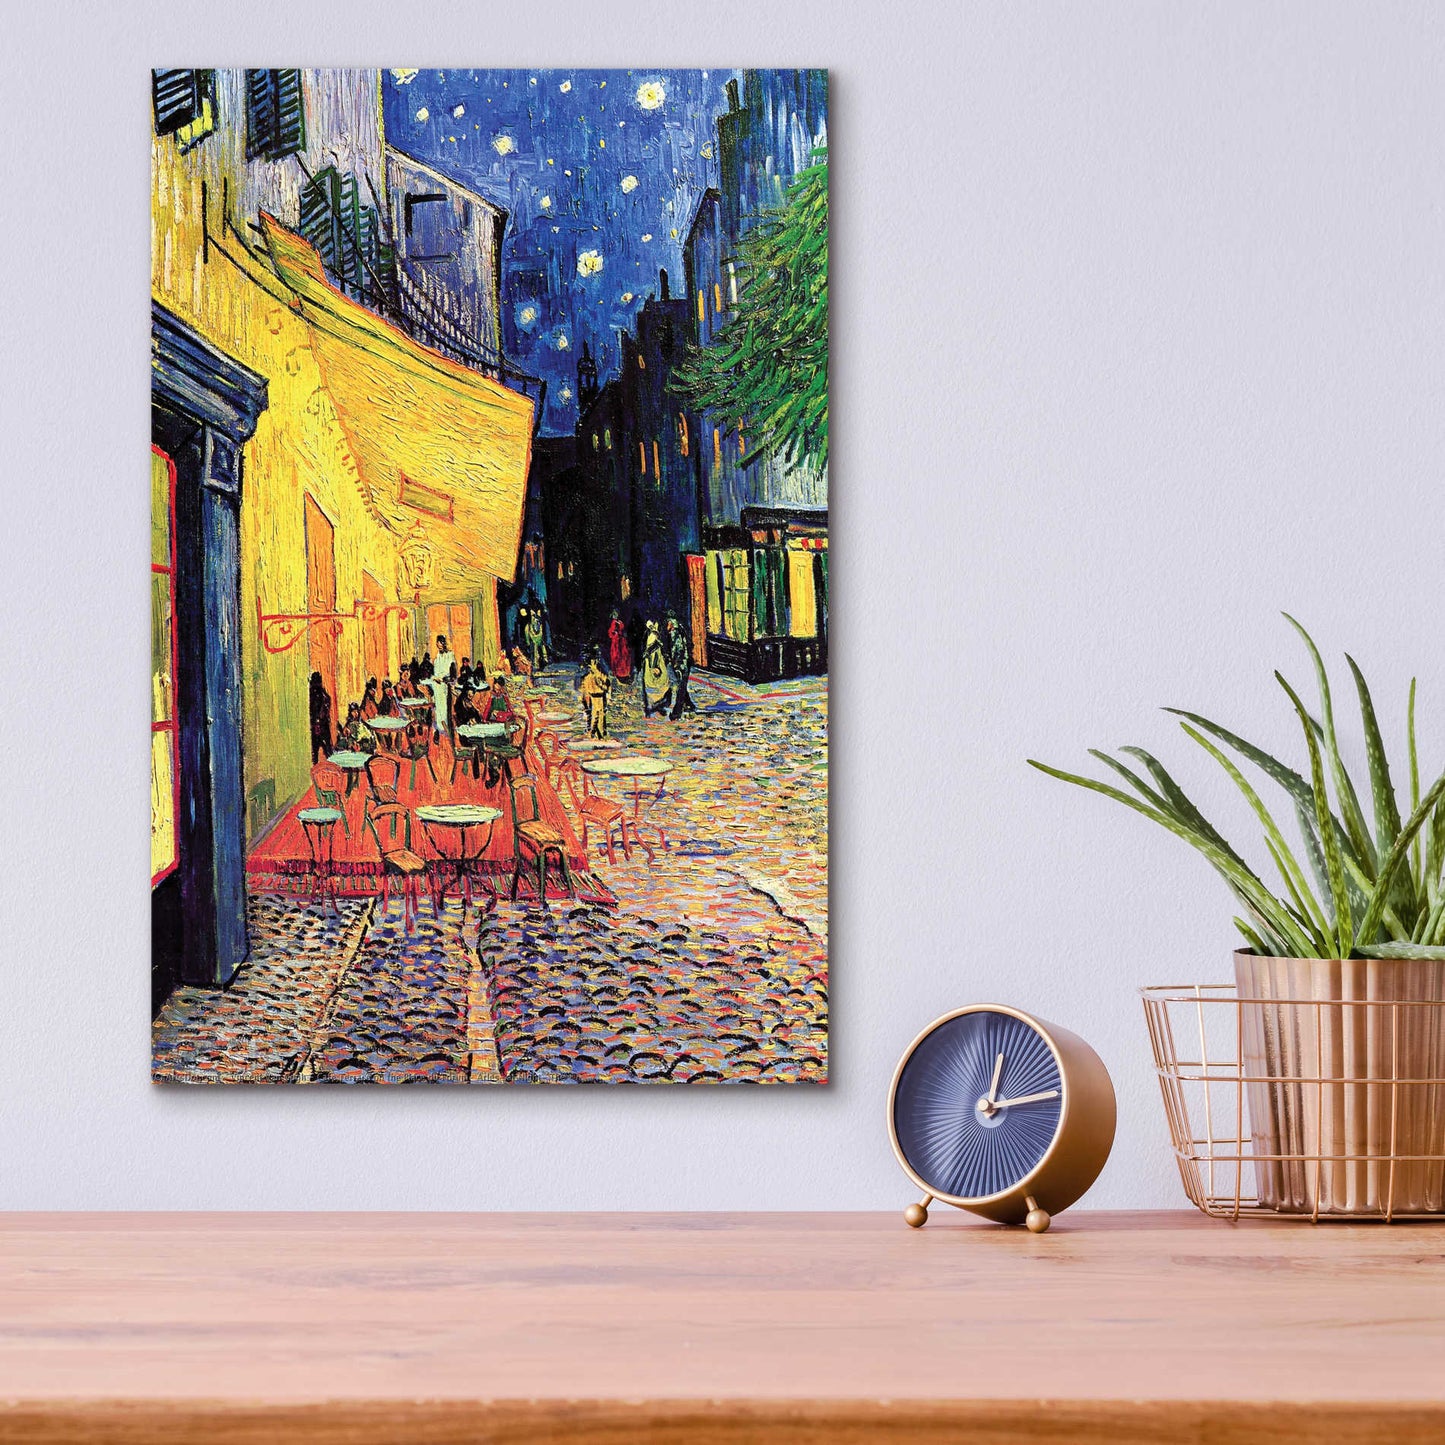 Epic Art 'Cafe Terrace at Night' by Vincent van Gogh, Acrylic Glass Wall Art,12x16